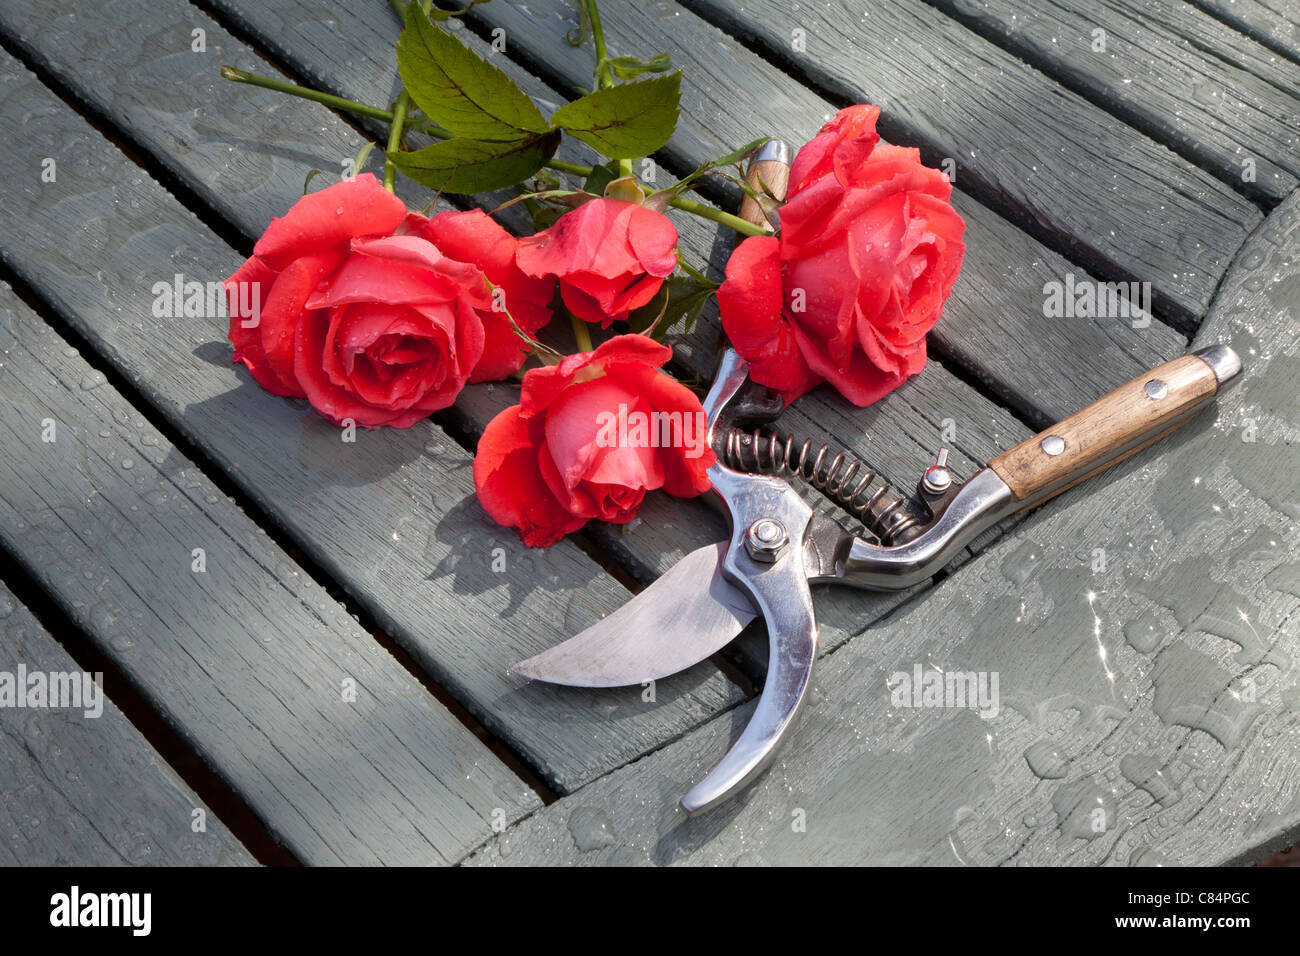 RED ROSES AND SECATEURSON WOODEN SLATTED TABLE IN GARDEN UK Stock Photo